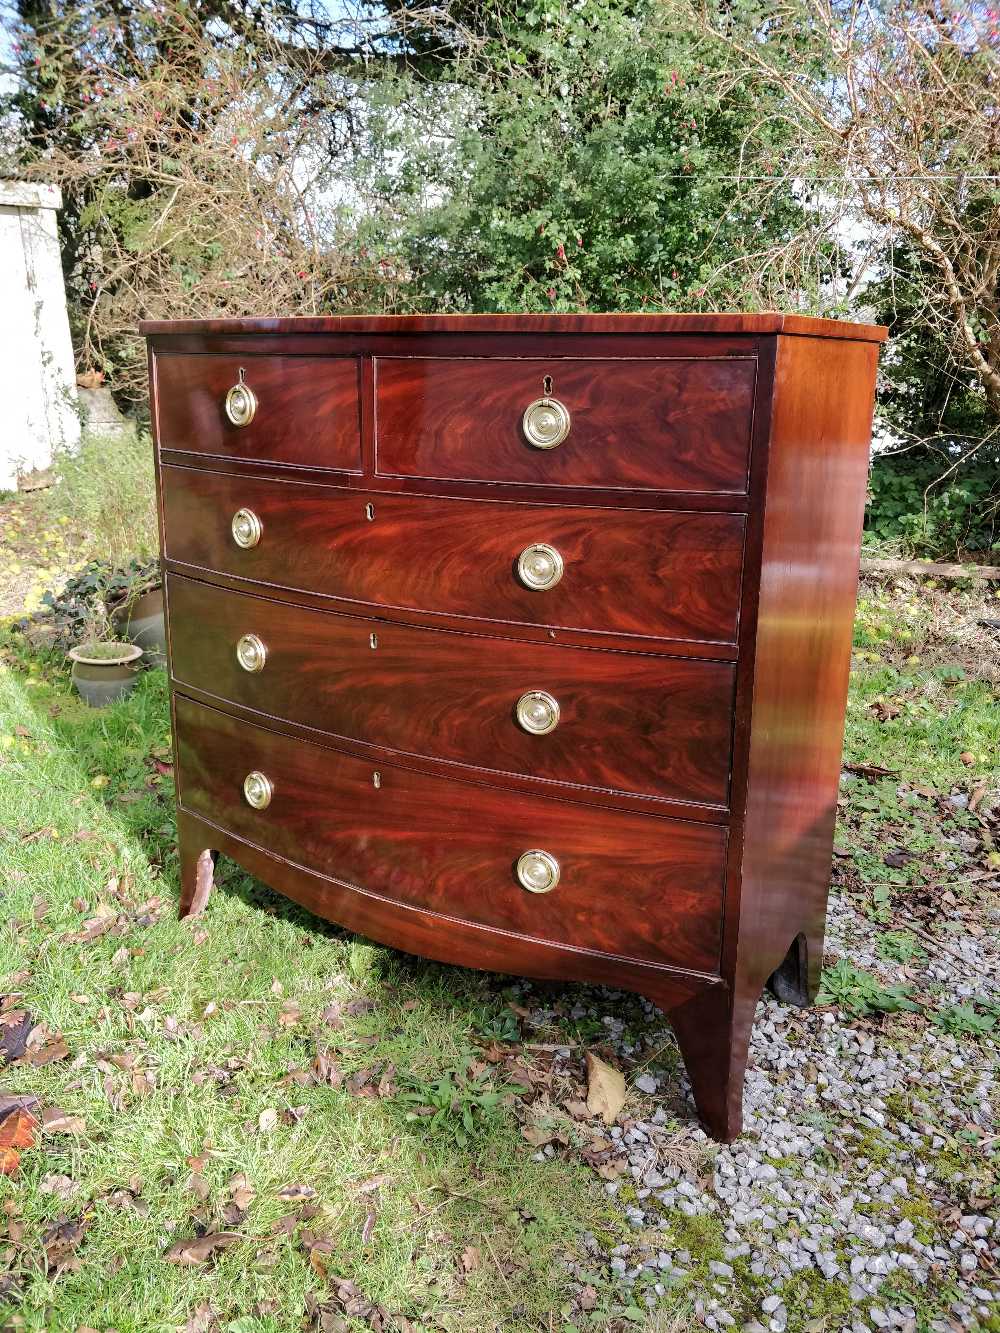 A VERY FINE GEORGIAN FIGURED MAHOGANY BOW FRONTED CHEST OF DRAWERS, circa 1800, with crossbanded and - Image 4 of 7